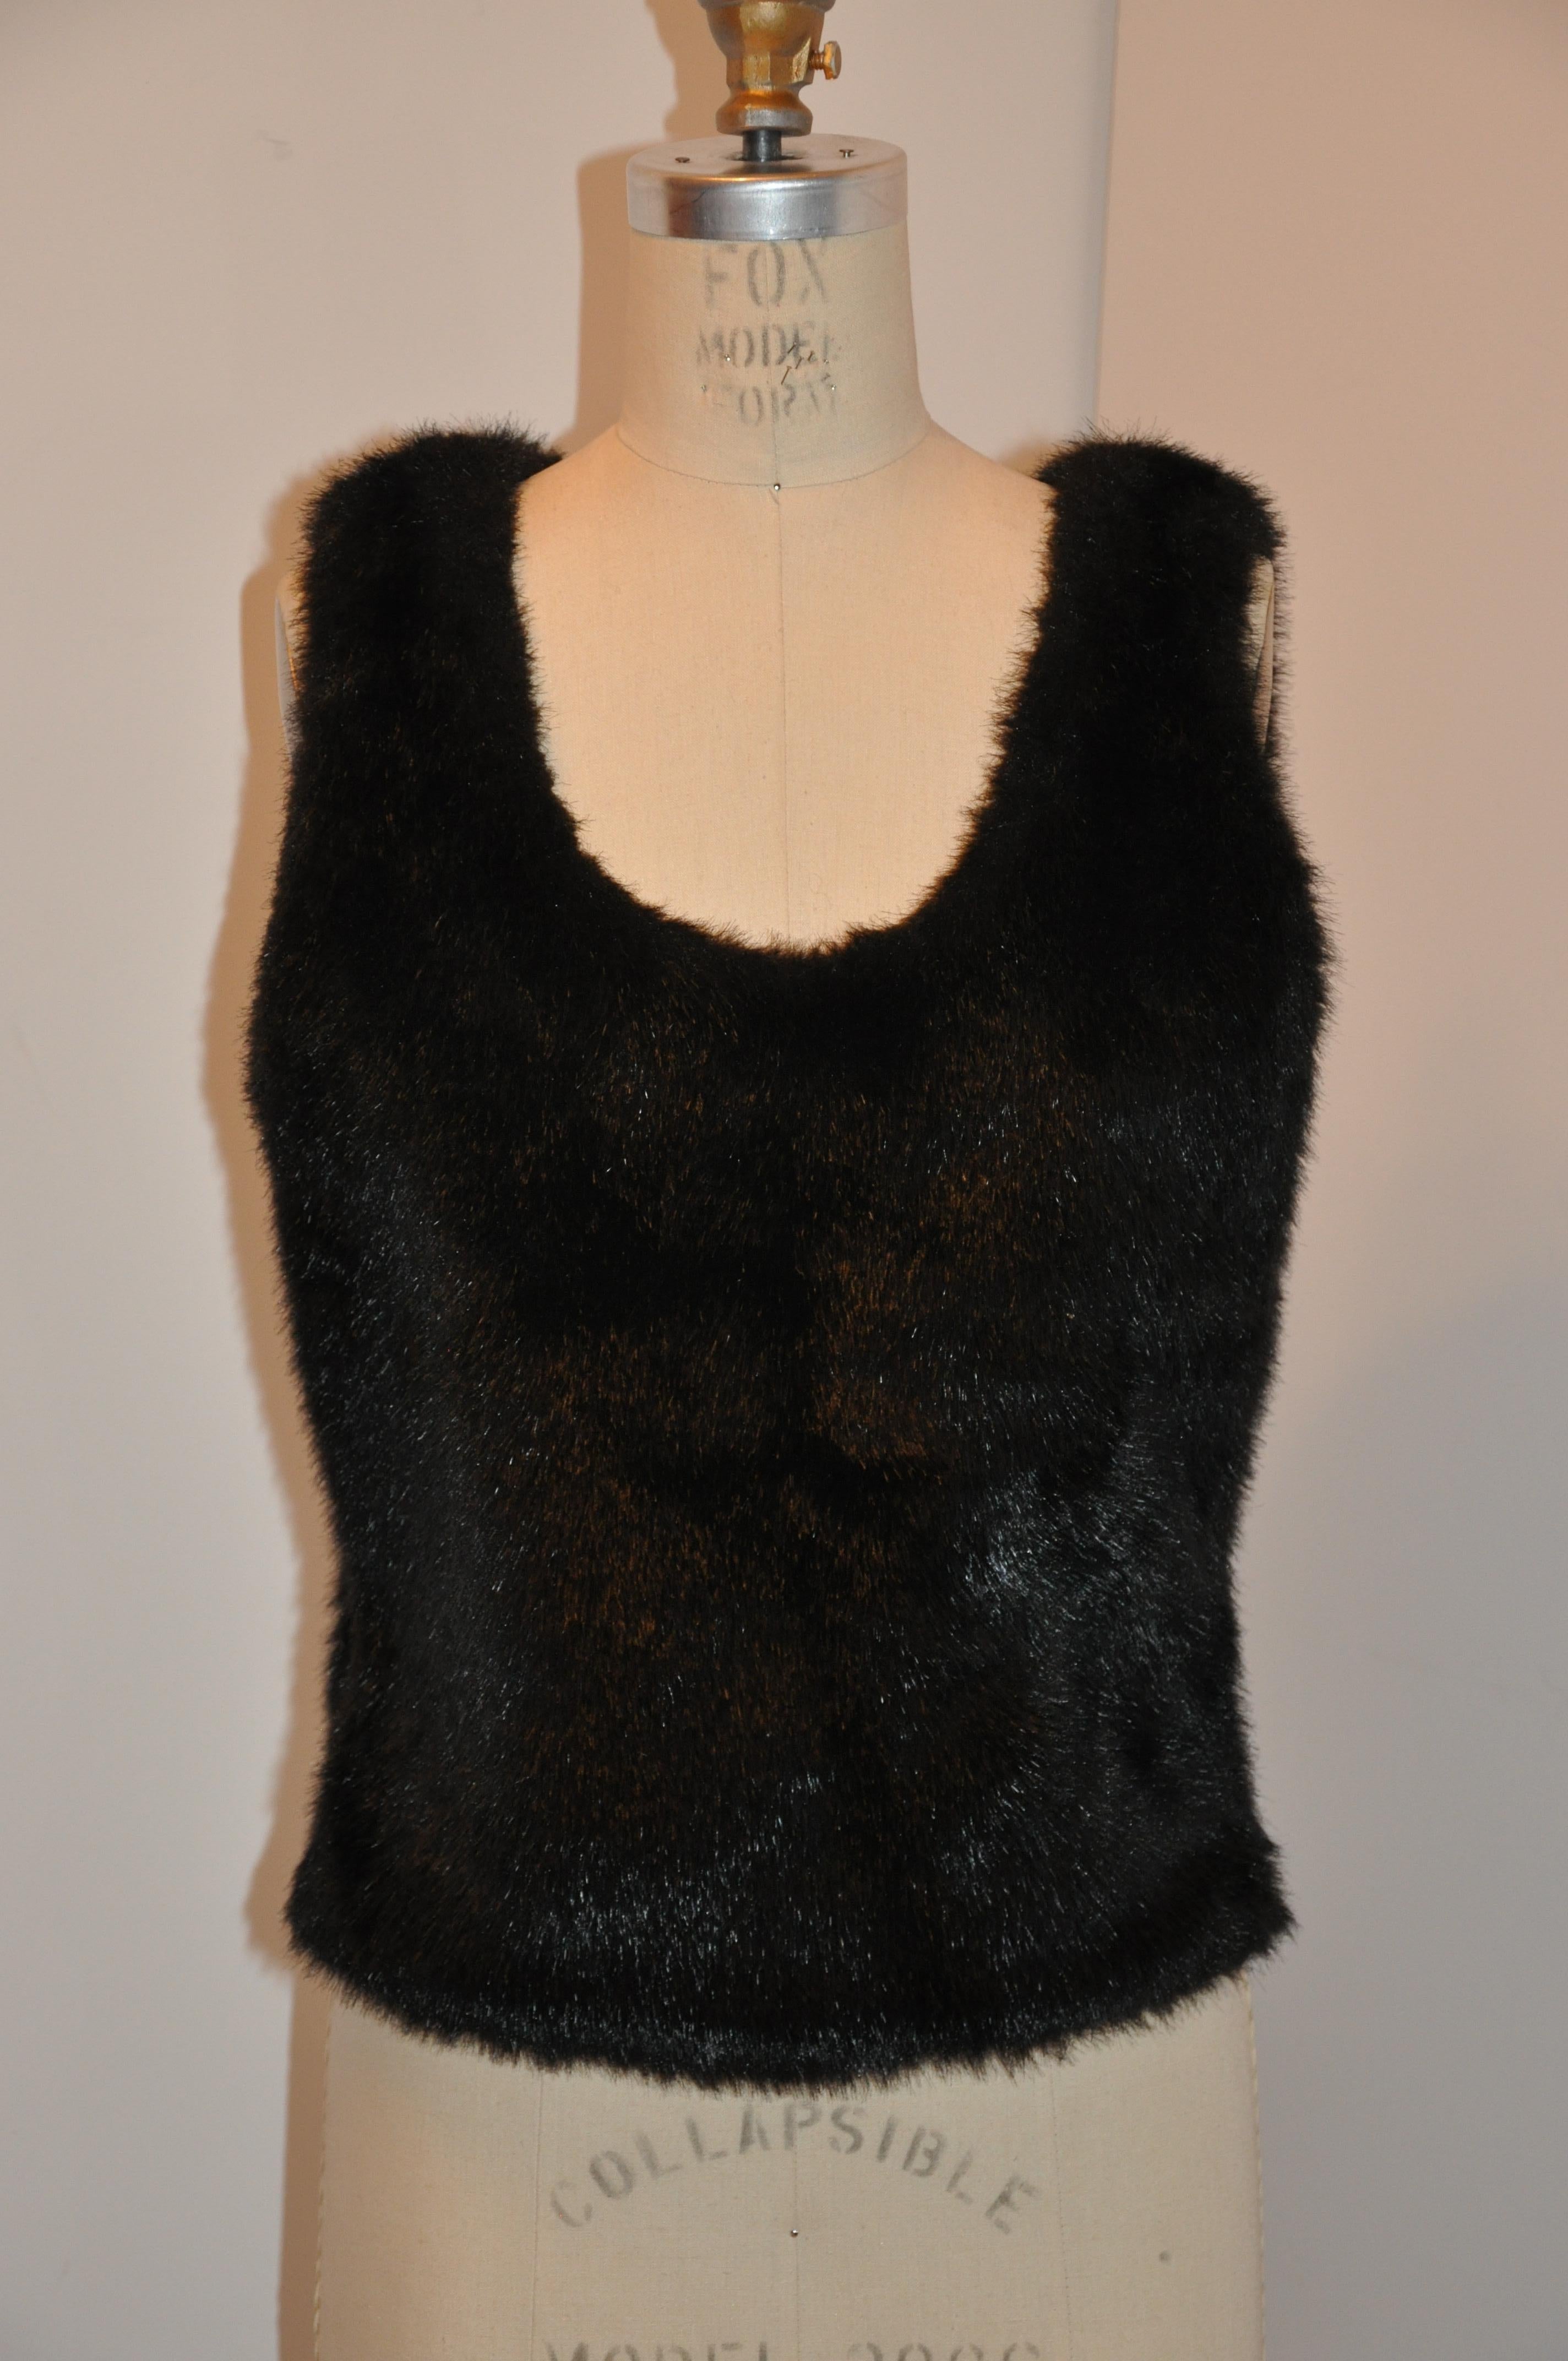    Gianfranco Ferre fully-lined black faux fur pullover is detailed with an invisible side zipper along the spandex side. Totaal length measures 22 inches. The underarm circumference measures 38 to 40  inches with the stretch spandex in mind. Waist